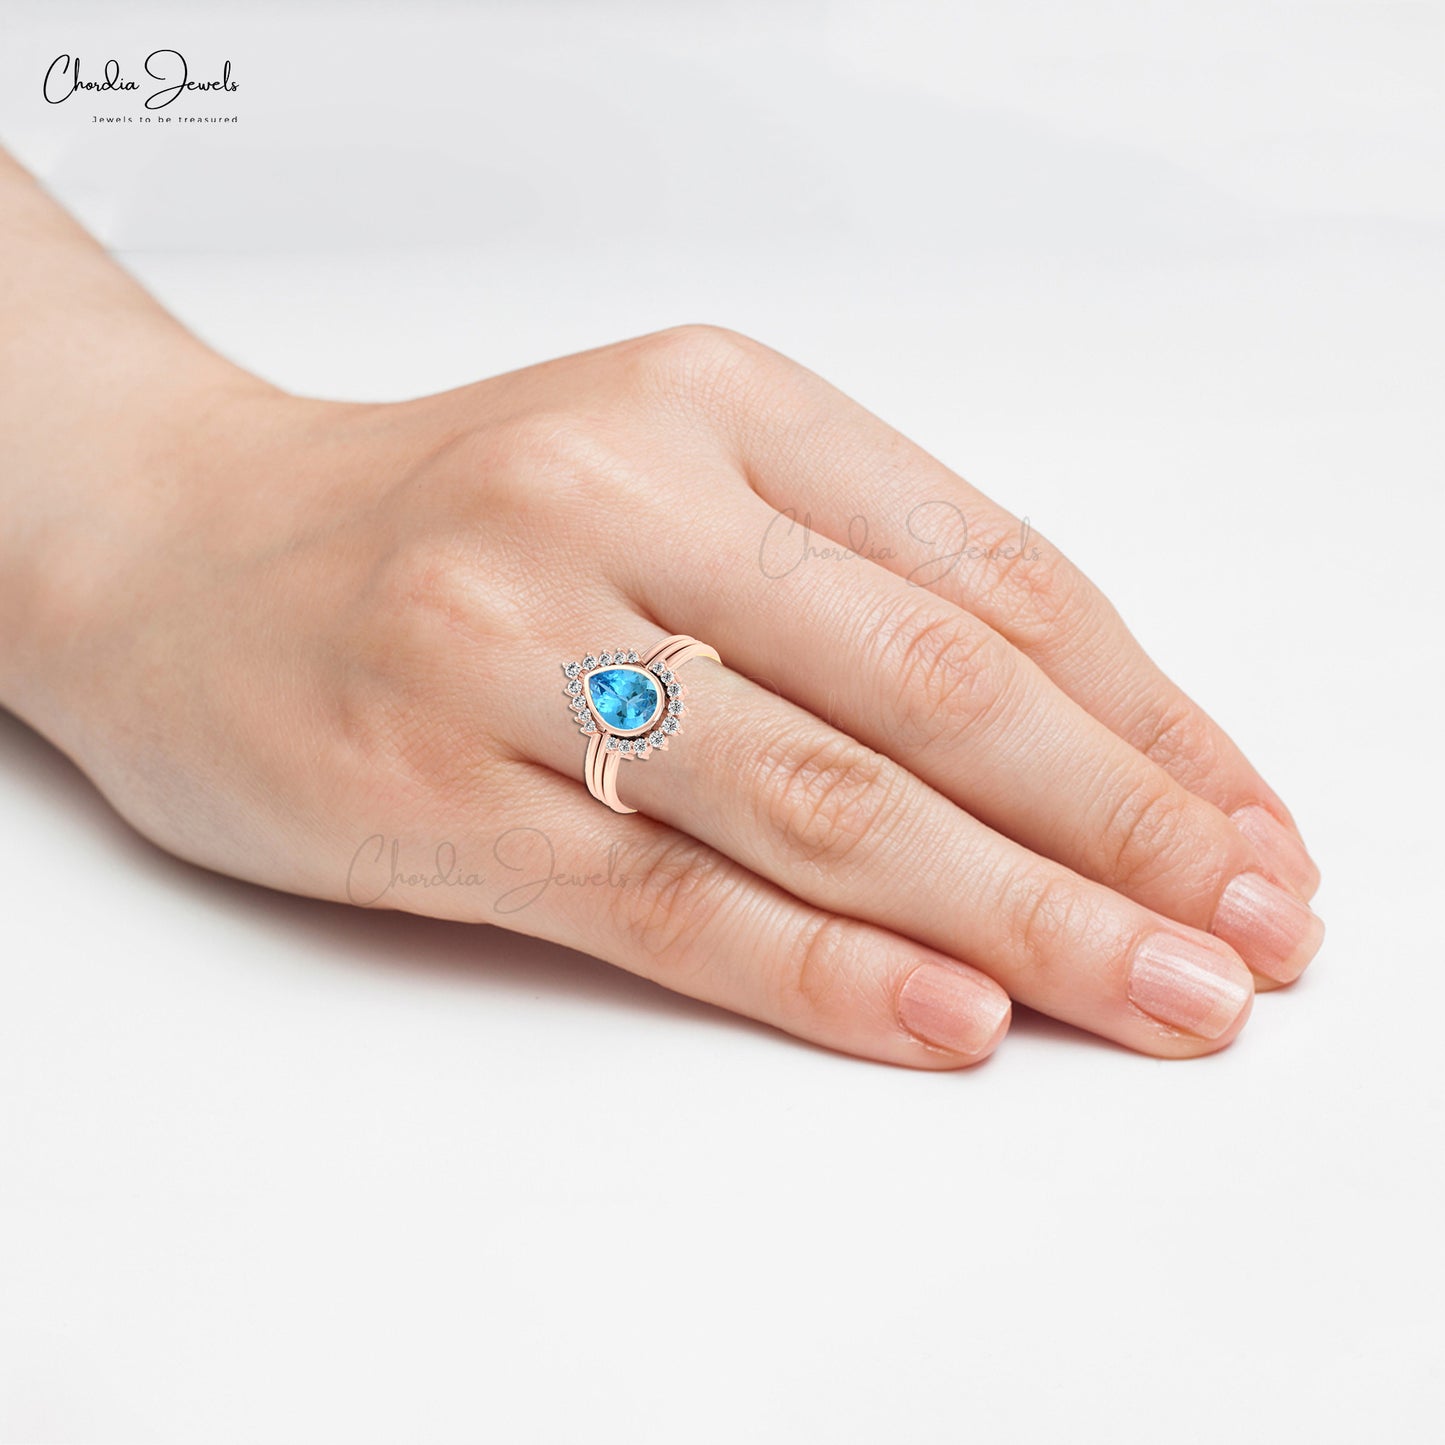 Swiss Blue Topaz & Diamond Dainty Ring in 14k Gold 0.63ct December Birthstone Stackable Ring